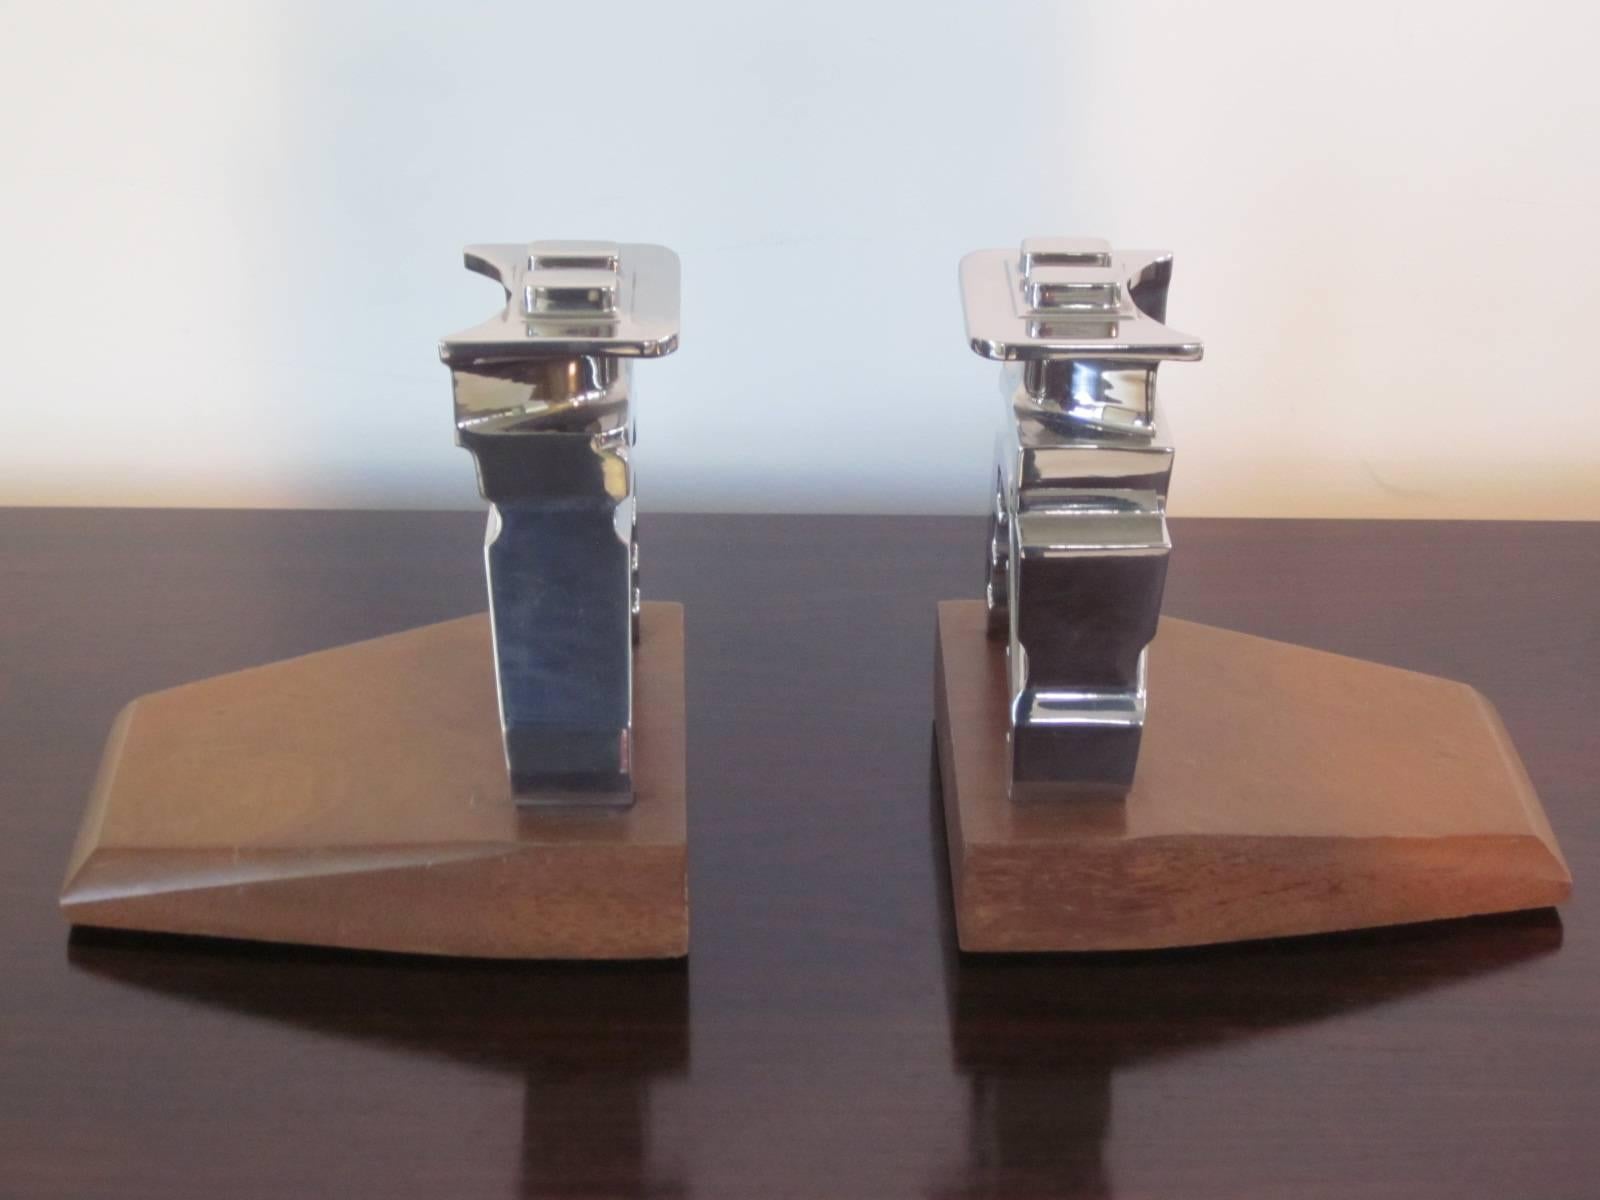 A pair of chromed steel Industrial automotive bookends mounted on two slabs of walnut, a great addition to the office shelve or desk. Parts are from a automotive jack unit from the 1930s.